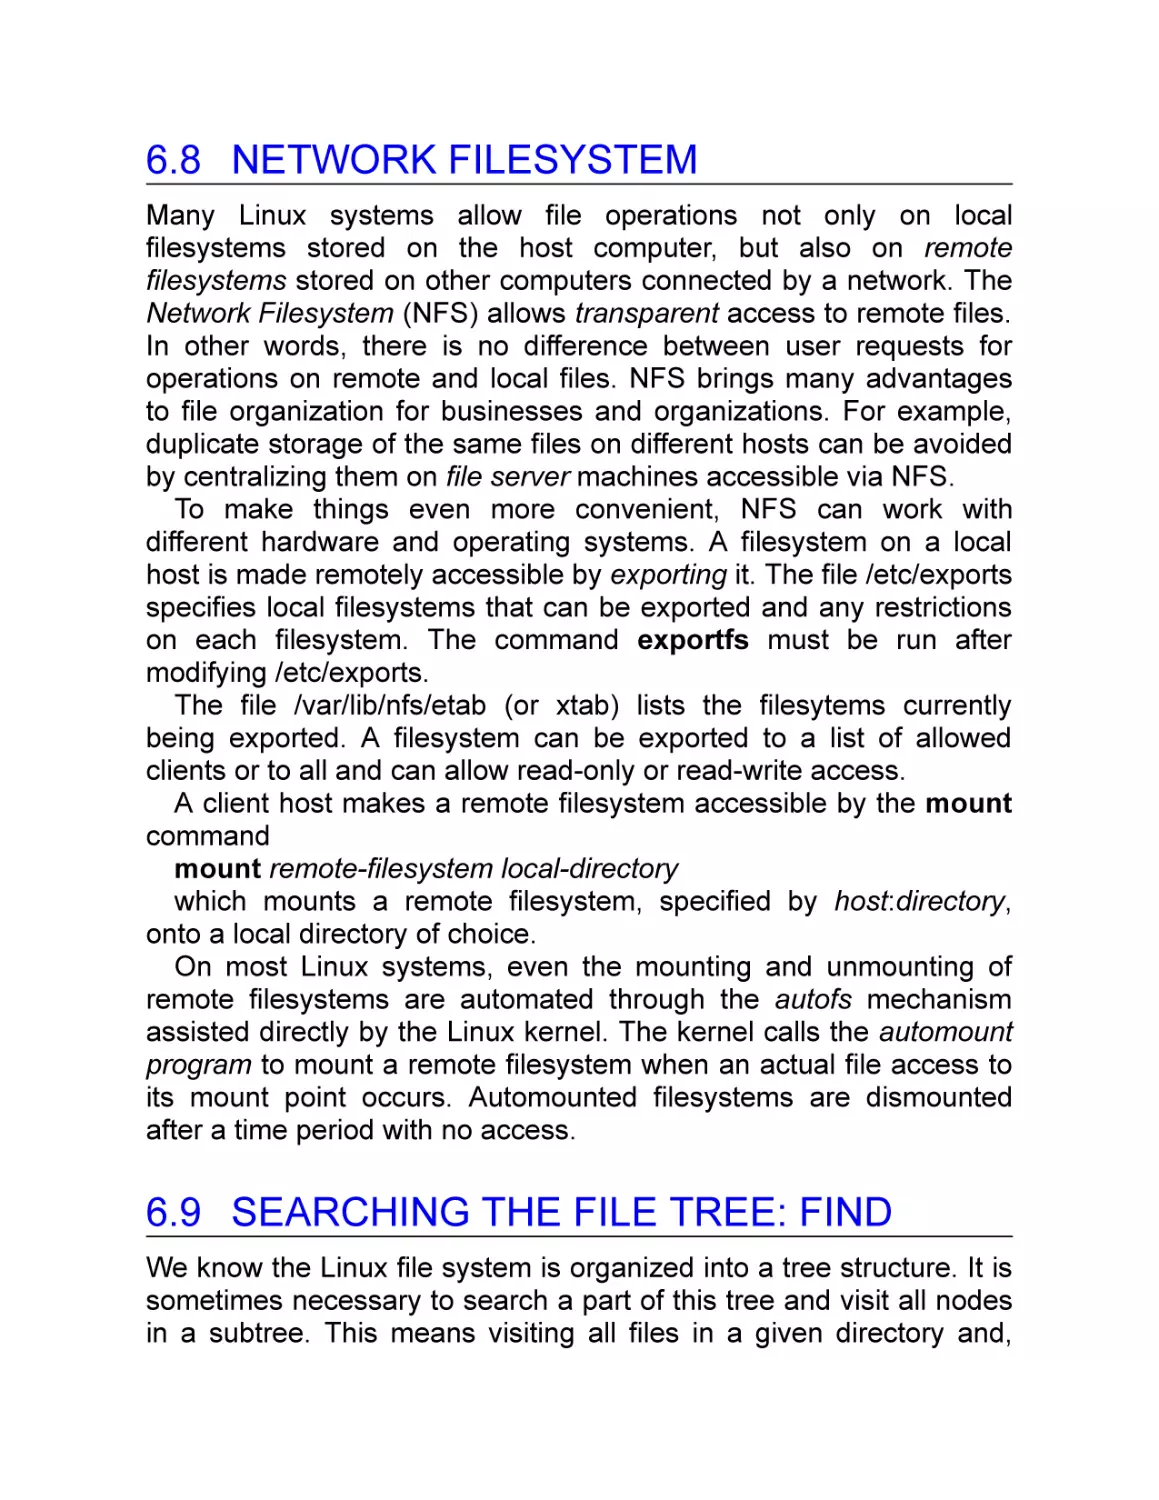 6.8 Network Filesystem
6.9 Searching the File Tree